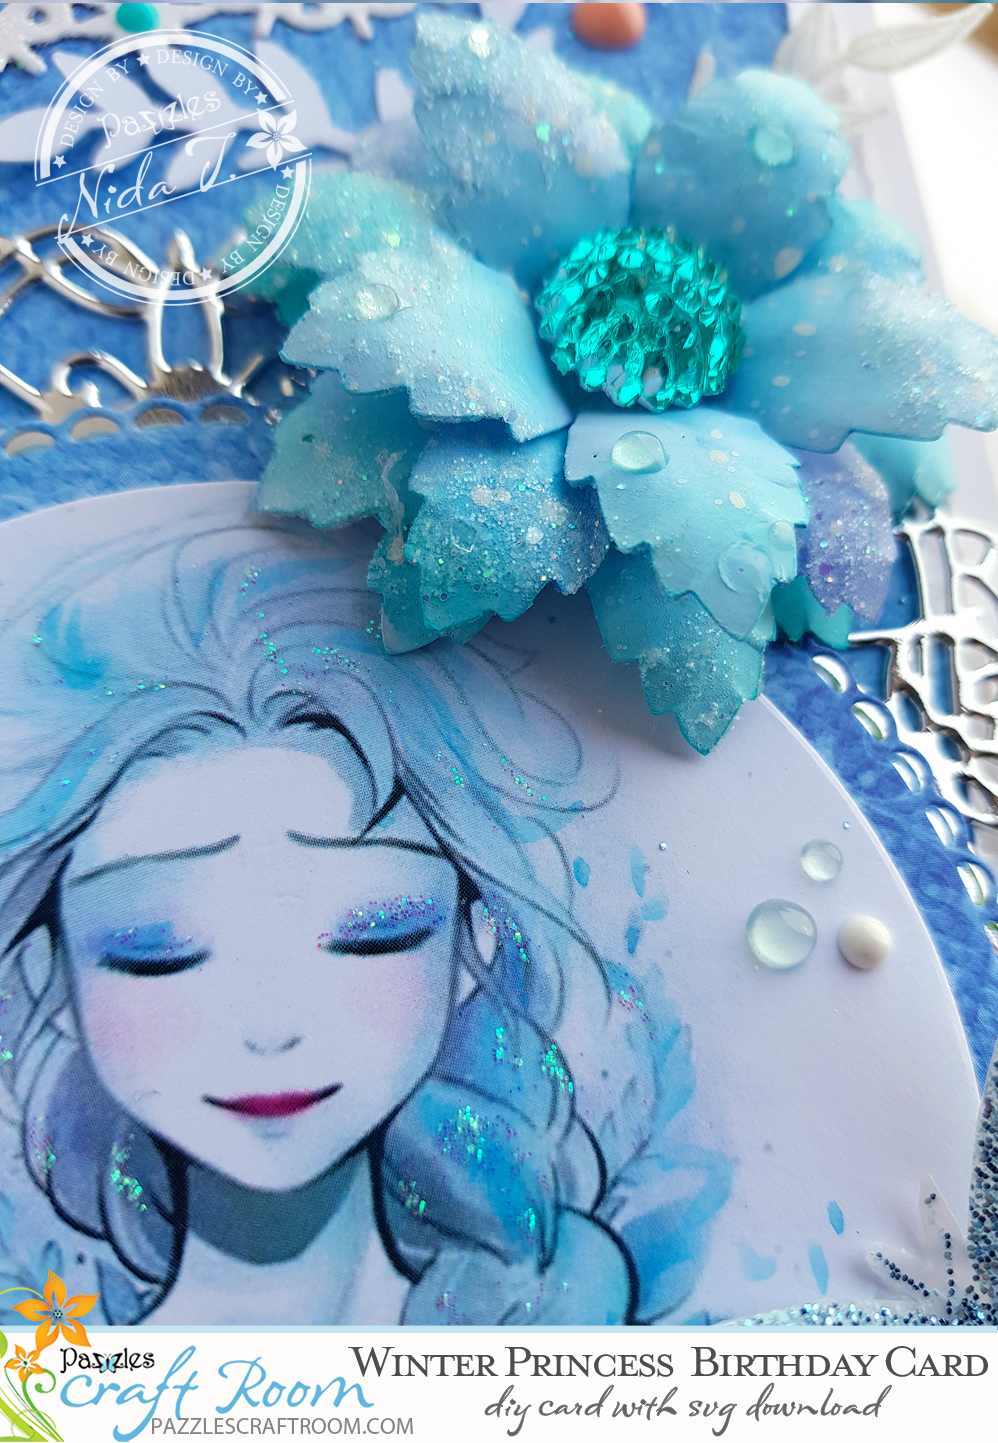 Pazzles DIY Winter Princess Birthday Card with instant SVG download. Compatible with all major electronic cutters including Pazzles Inspiration, Cricut, and Silhouette Cameo. Design by Nida Tanweer.